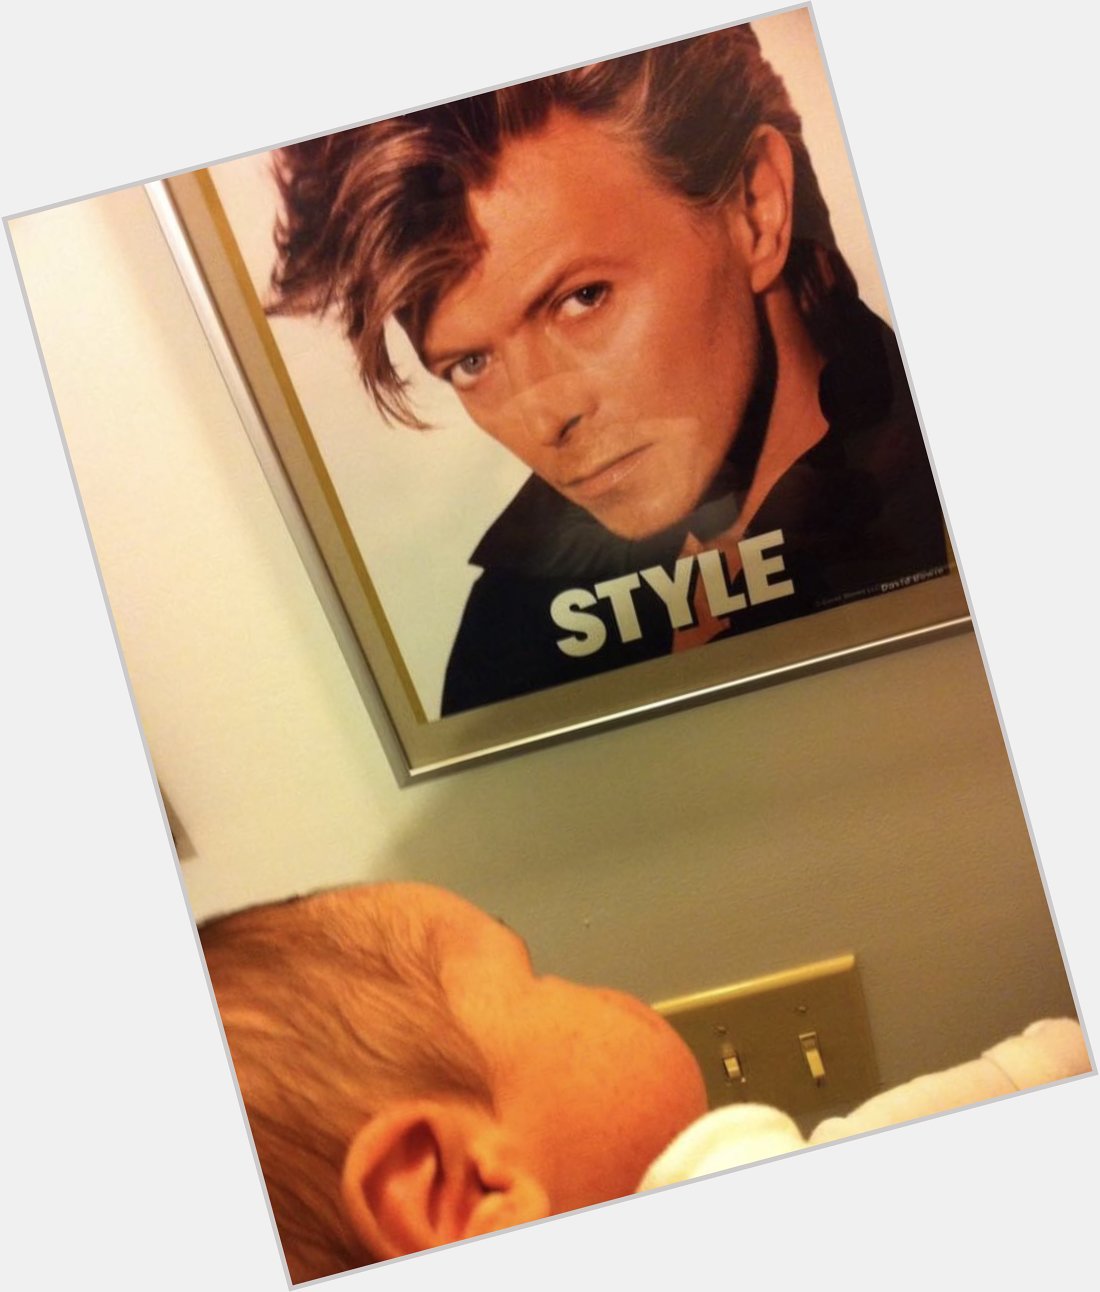 My son Phillip at 8 days old, and my son Phillip at 10 years old. Much respect, happy birthday David Bowie 